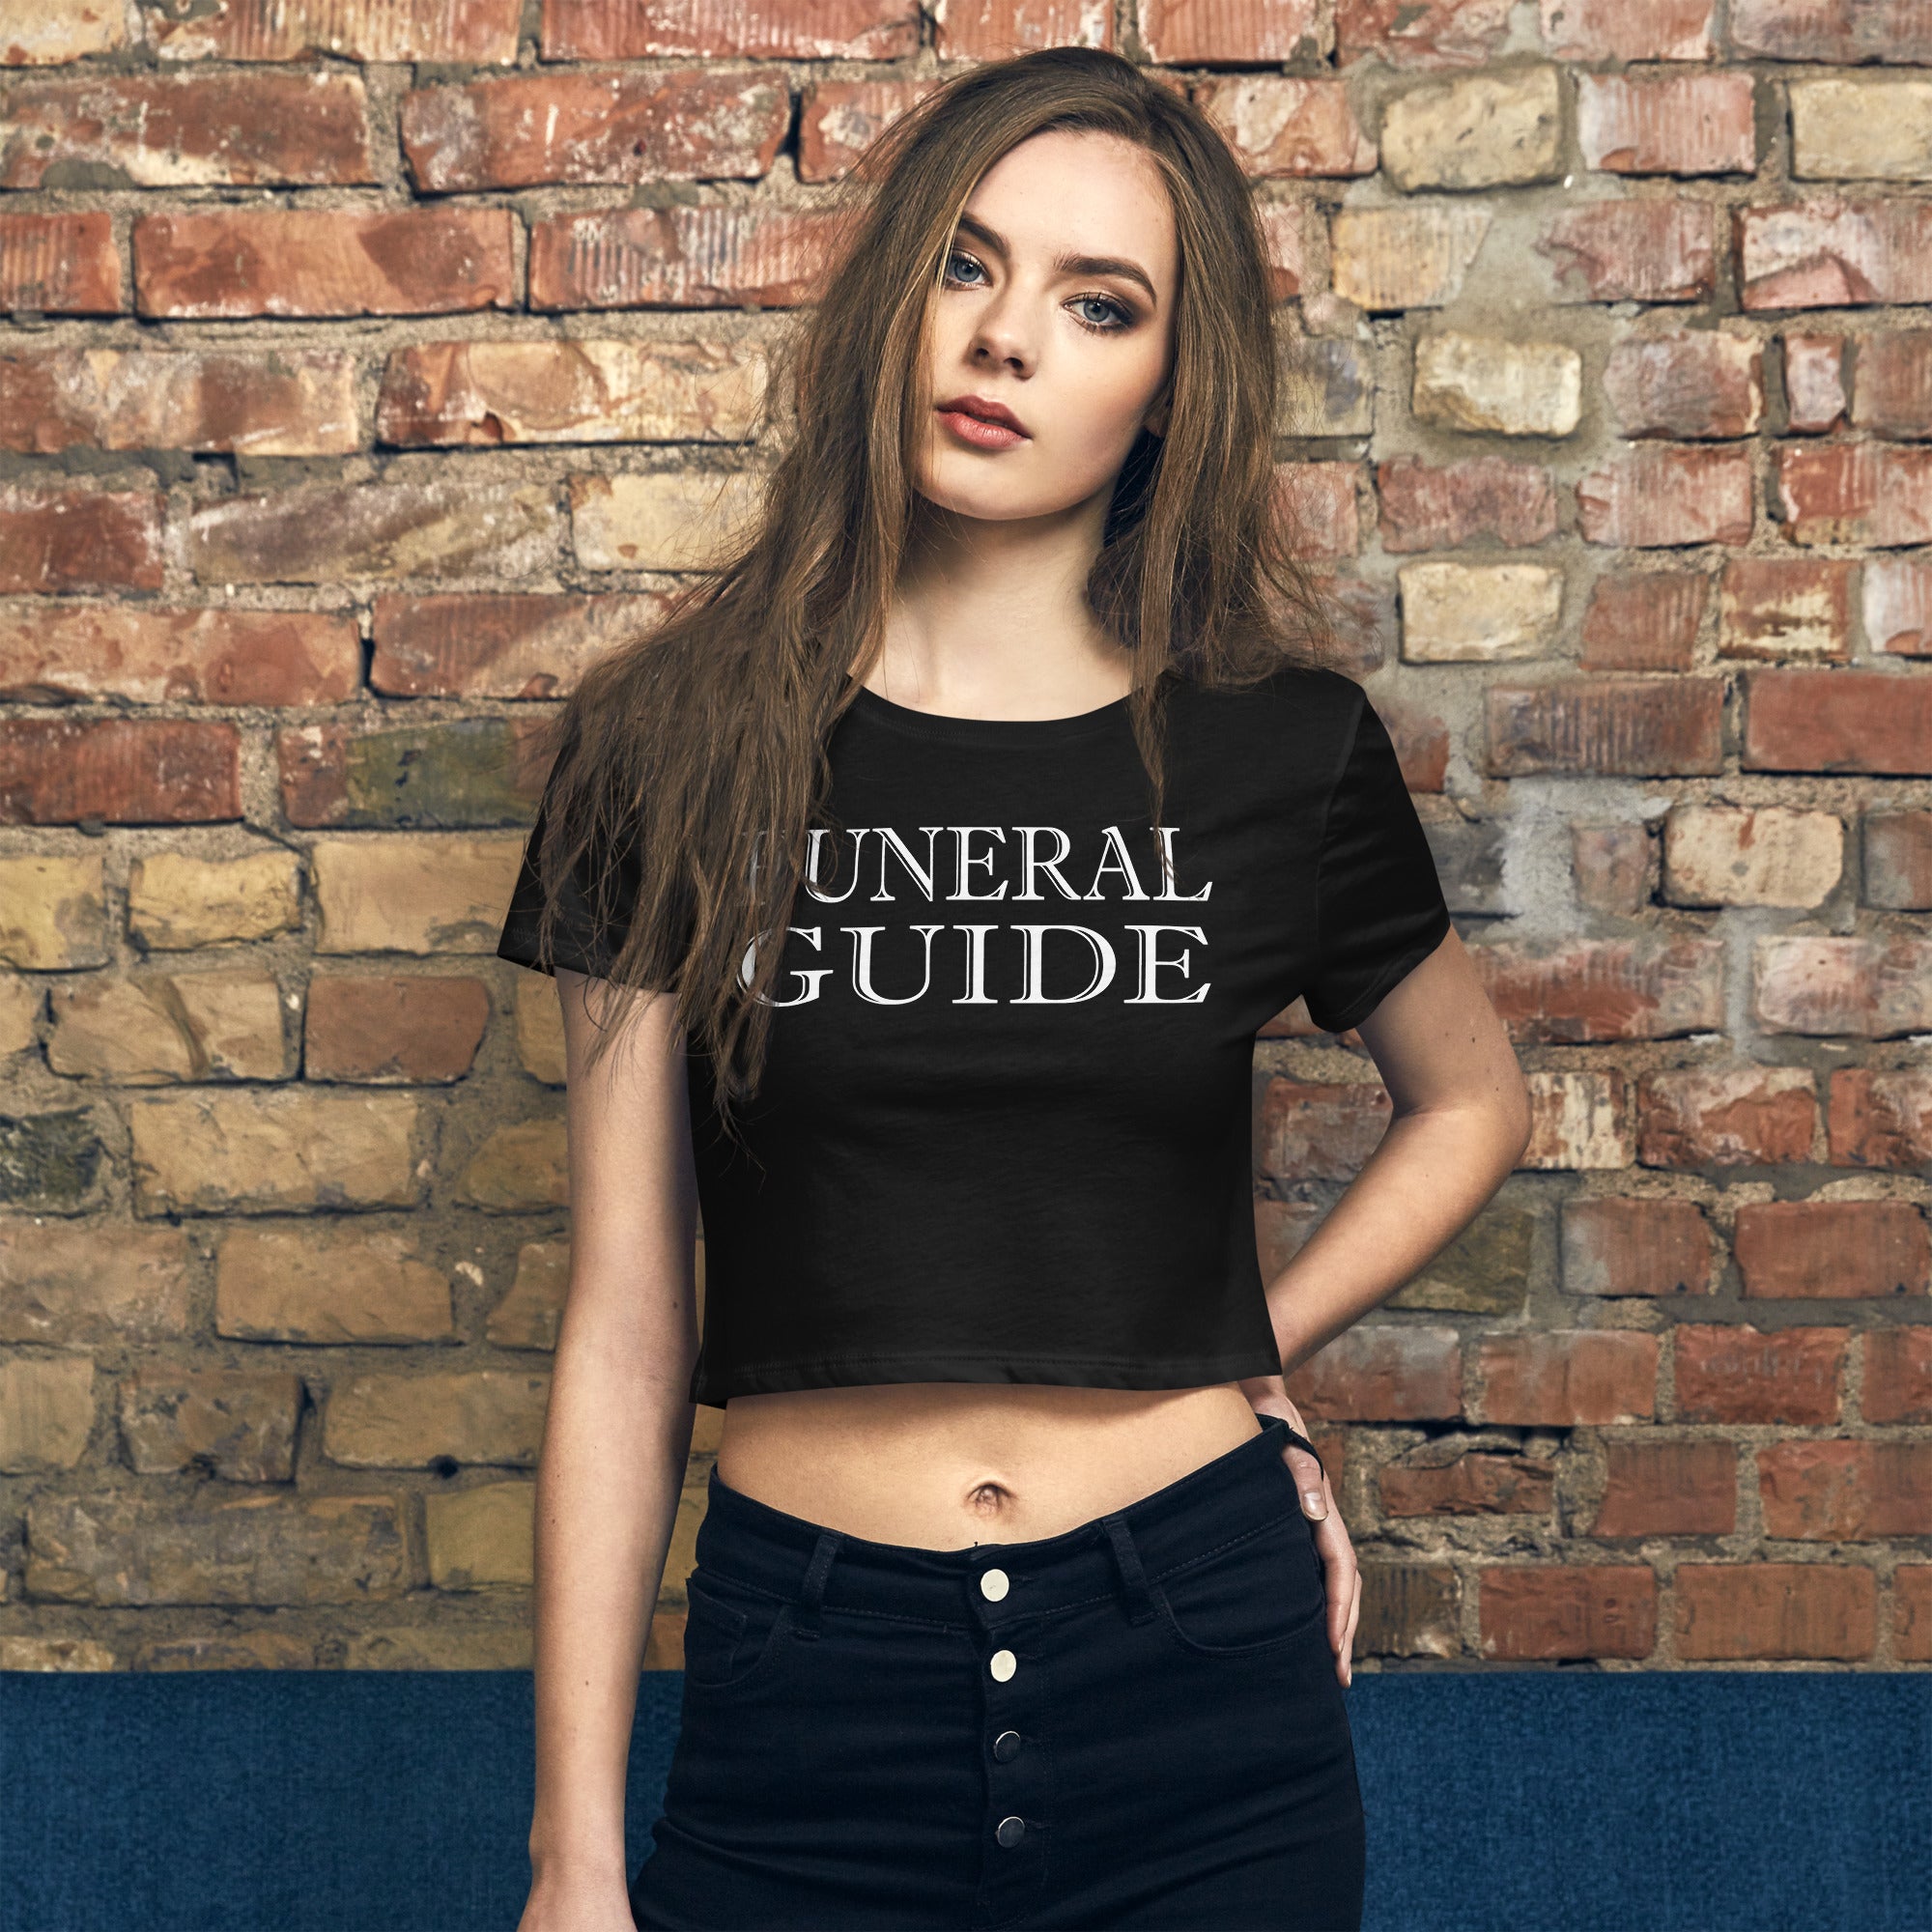 Funeral Guide Gothic Mortician Style Women’s Crop Tee - Edge of Life Designs